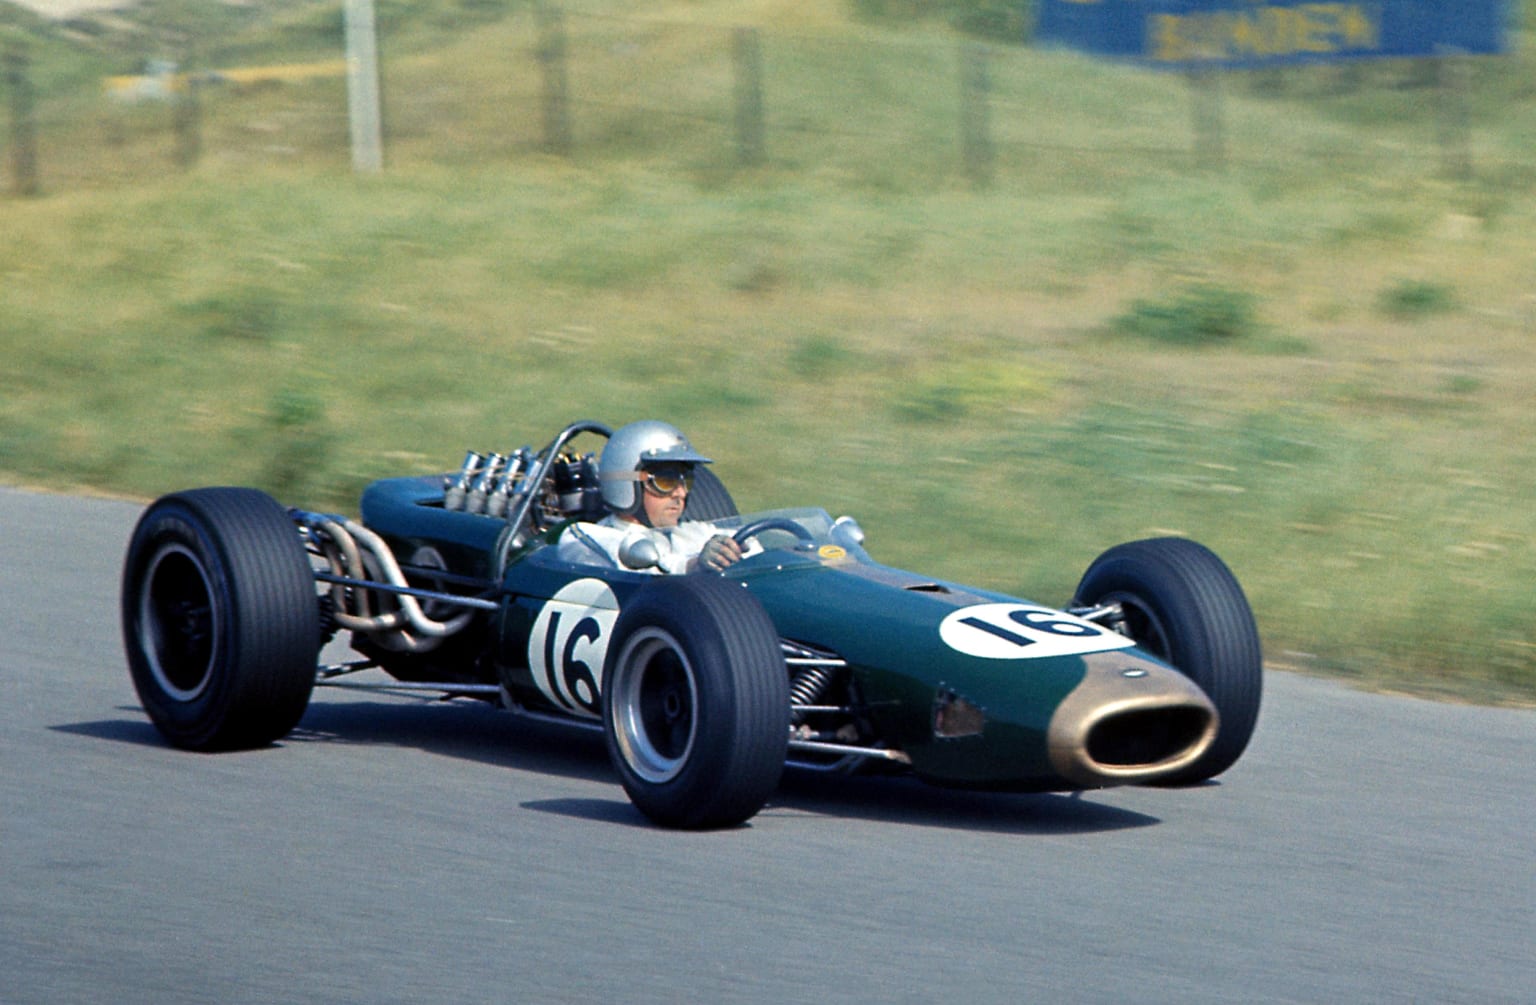 Brabham turned down efforts to revive name in F1